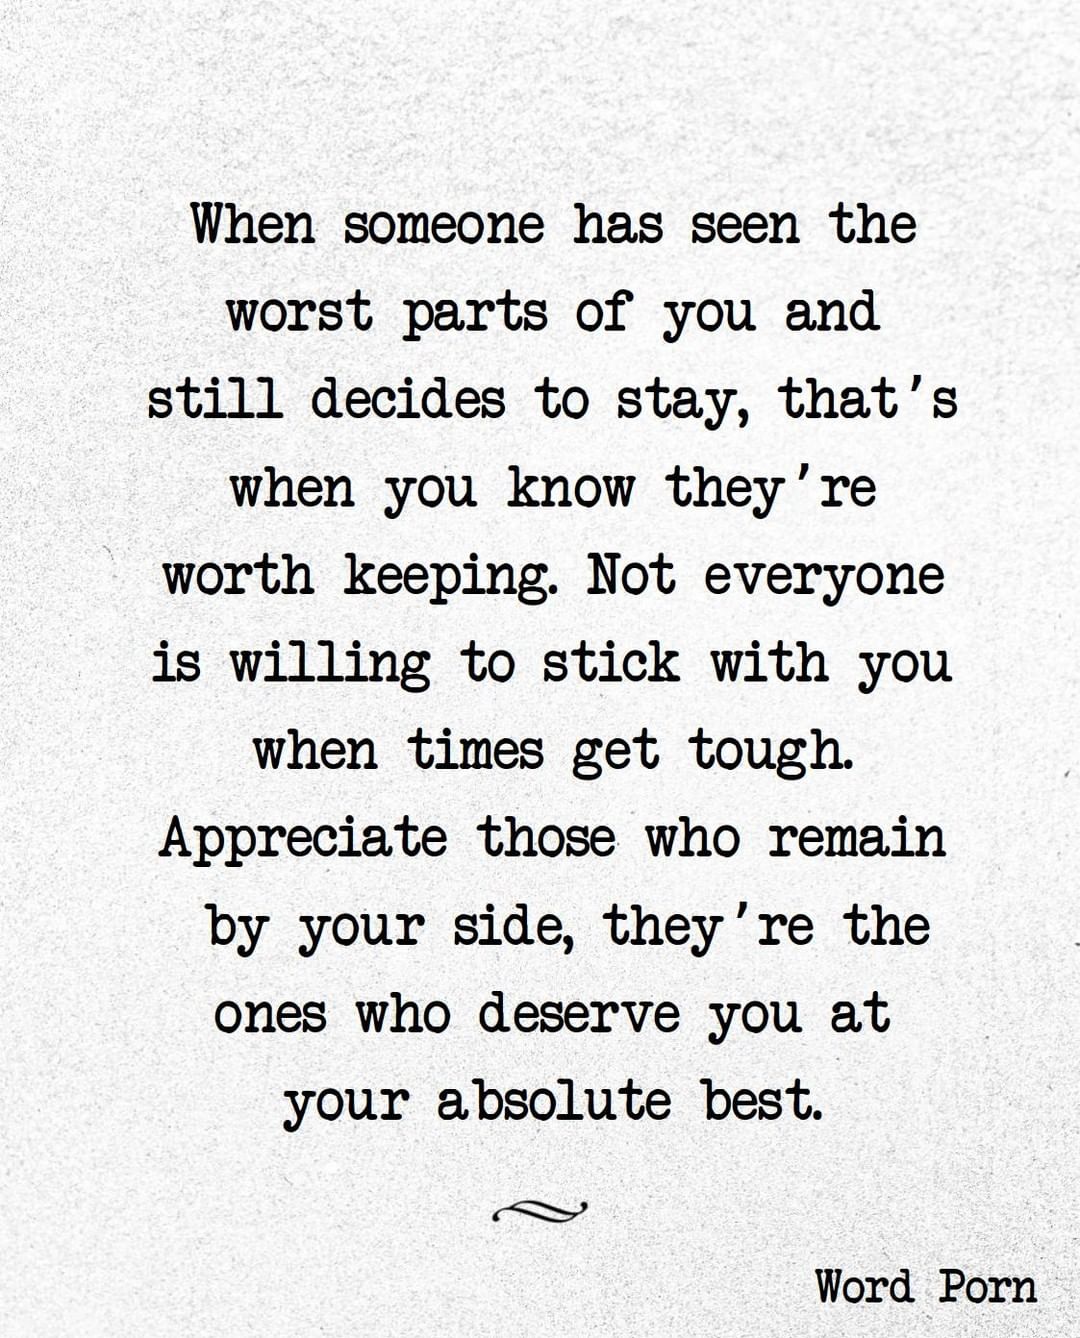 When someone has seen the worst parts of you and still decides to stay, that's when you know they' re worth keeping. Not everyone is willing to stick with you when times get tough. Appreciate those who remain by your side, they're the ones who deserve you at your absolute best.